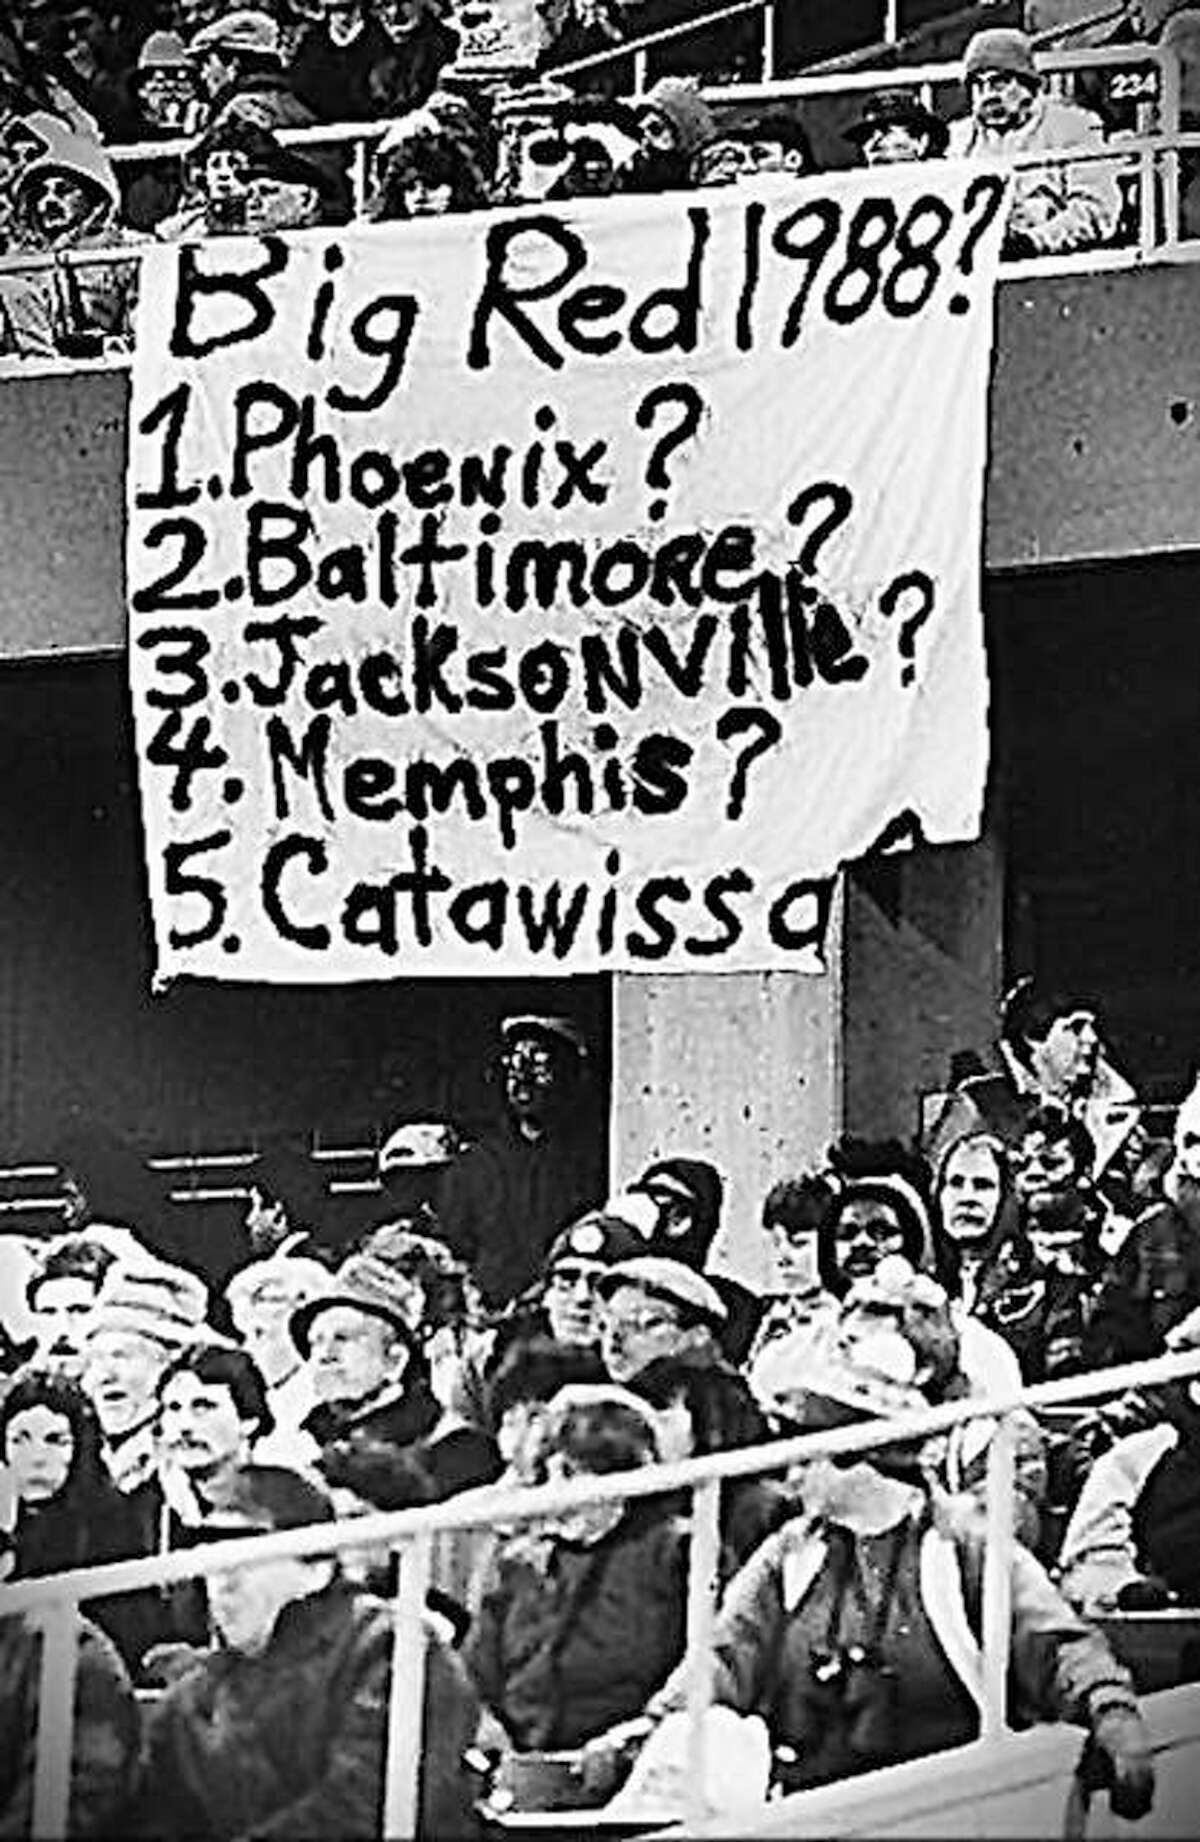 St. Louis Cardinals football fans display their feelings during a game at Busch Stadium during the 1987 season.